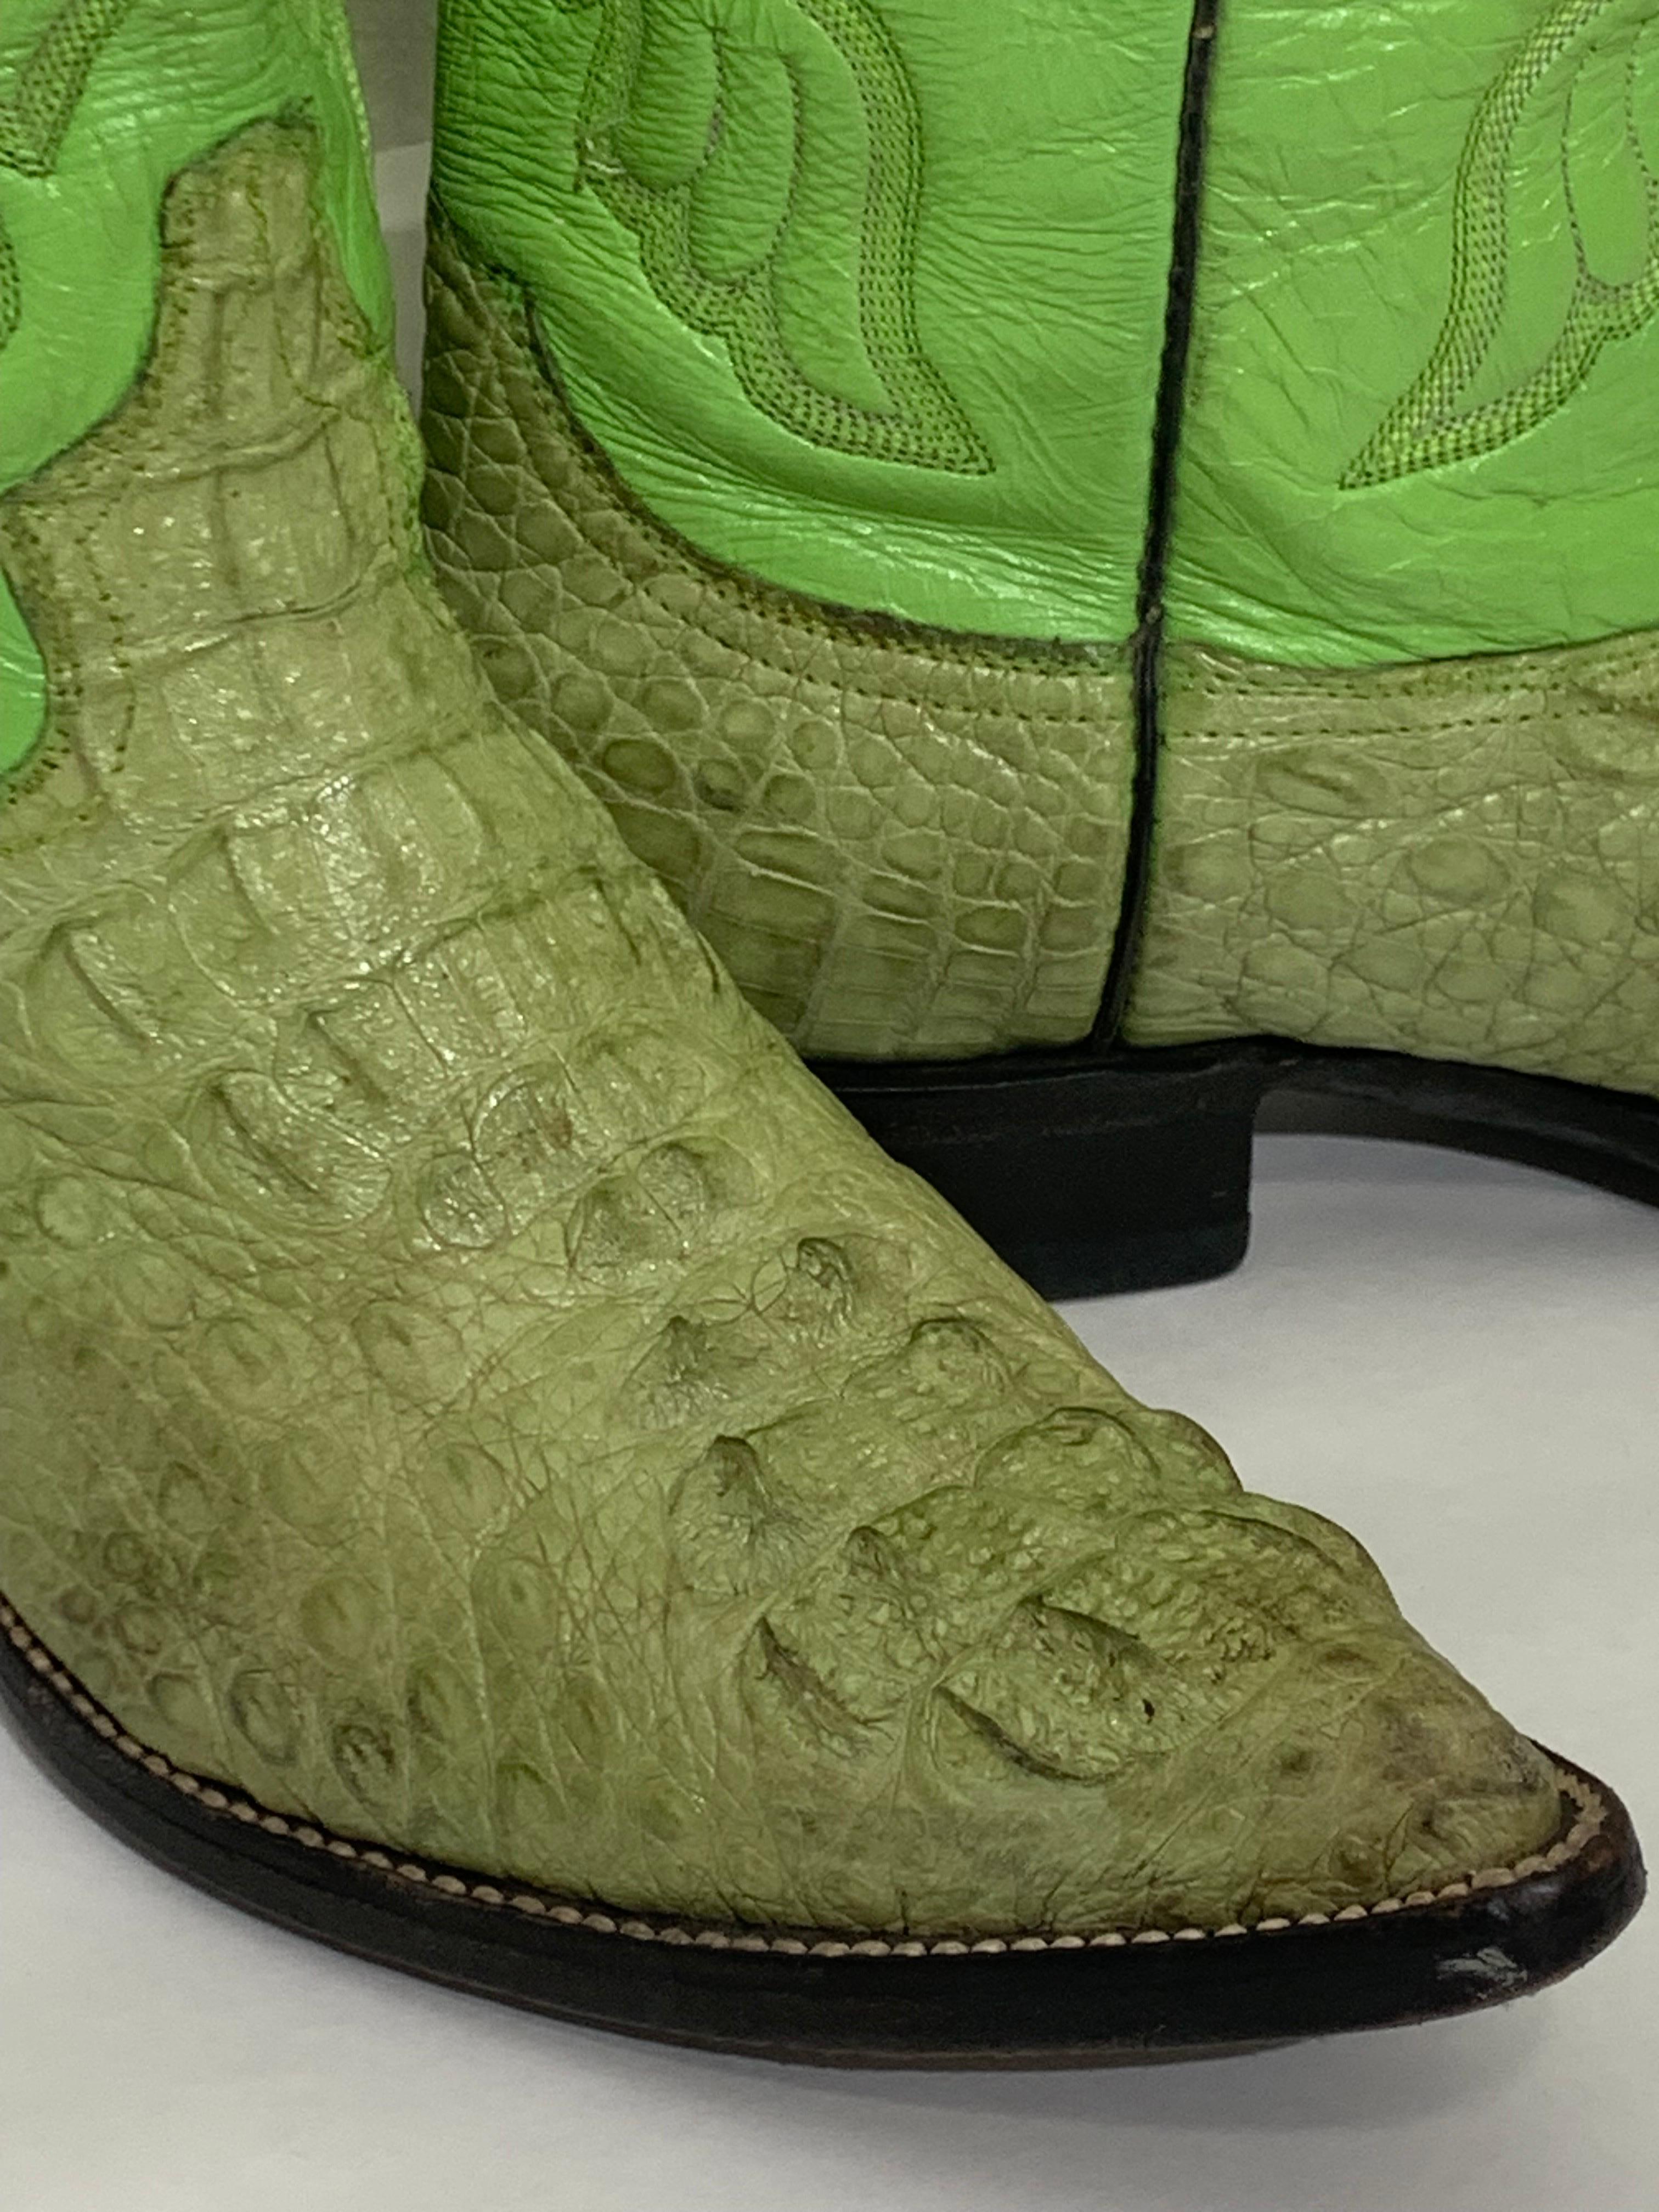 Men's Gecko Green Leather & Crocodile Western Cowboy Boots US Size 8 For Sale